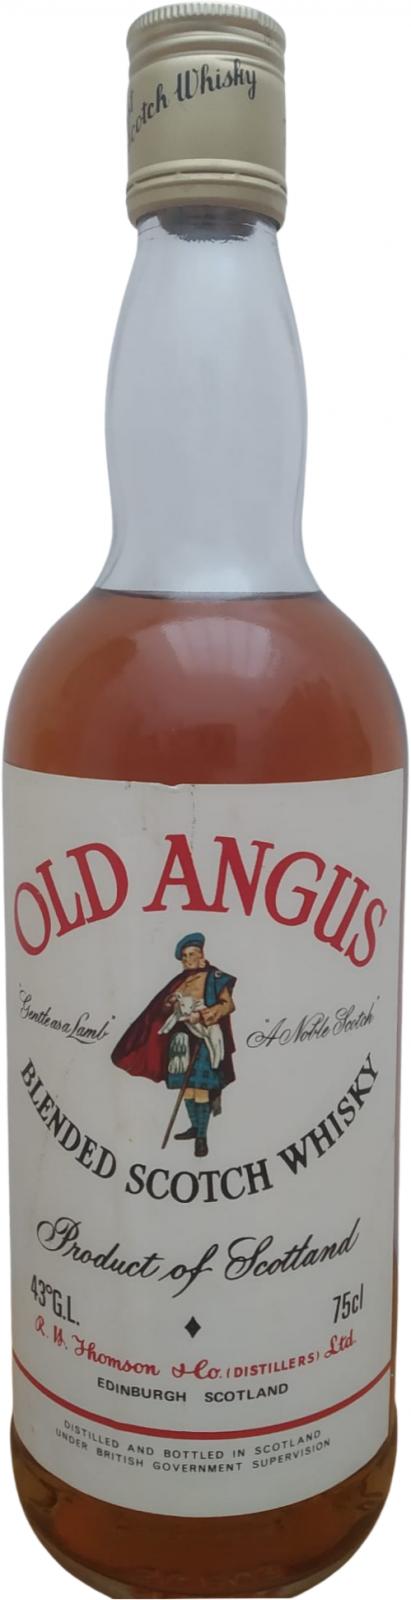 Old Angus Blended Scotch Whisky